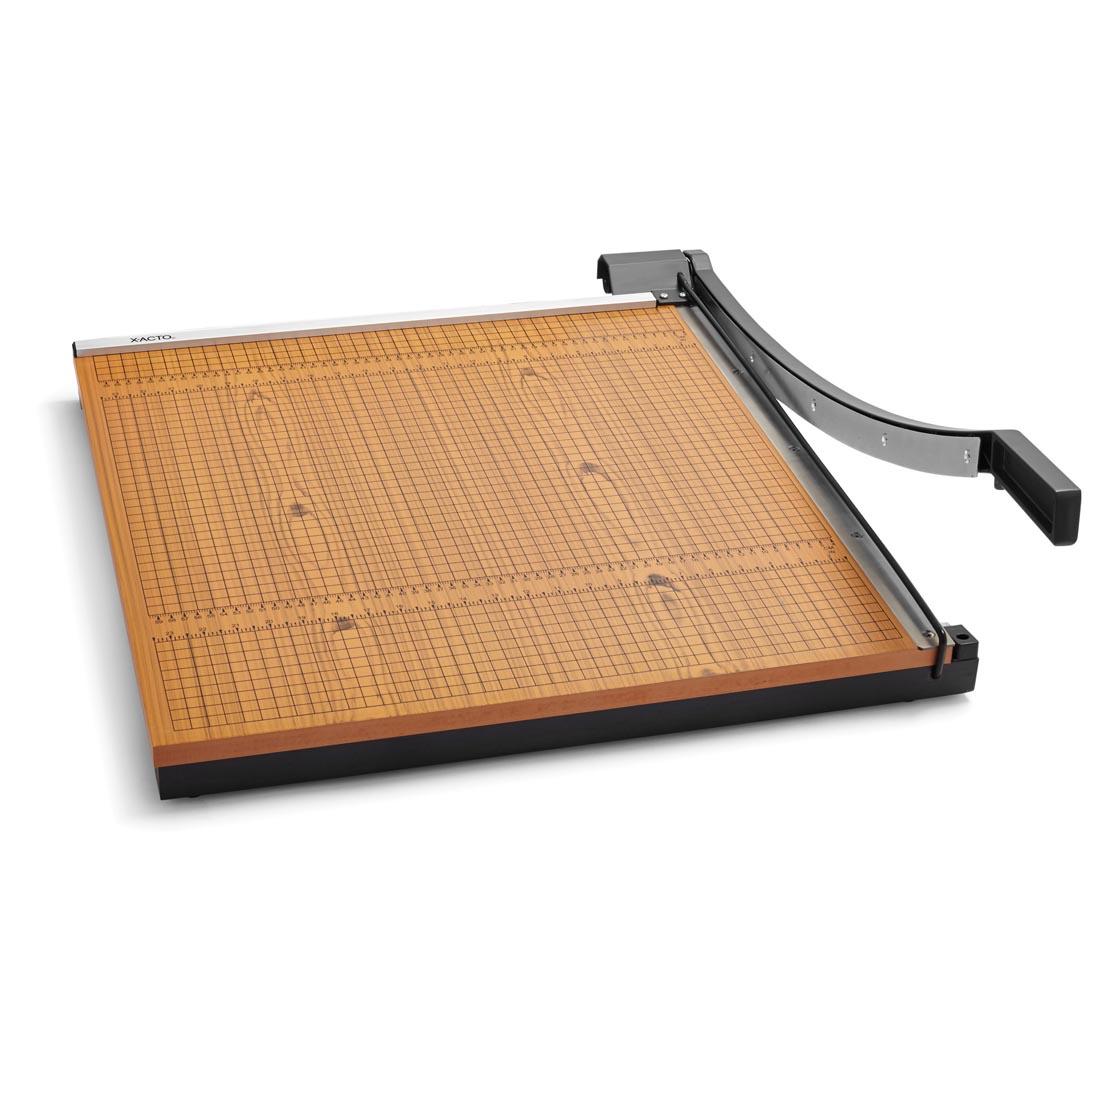 X-ACTO Square Wooden Trimmer